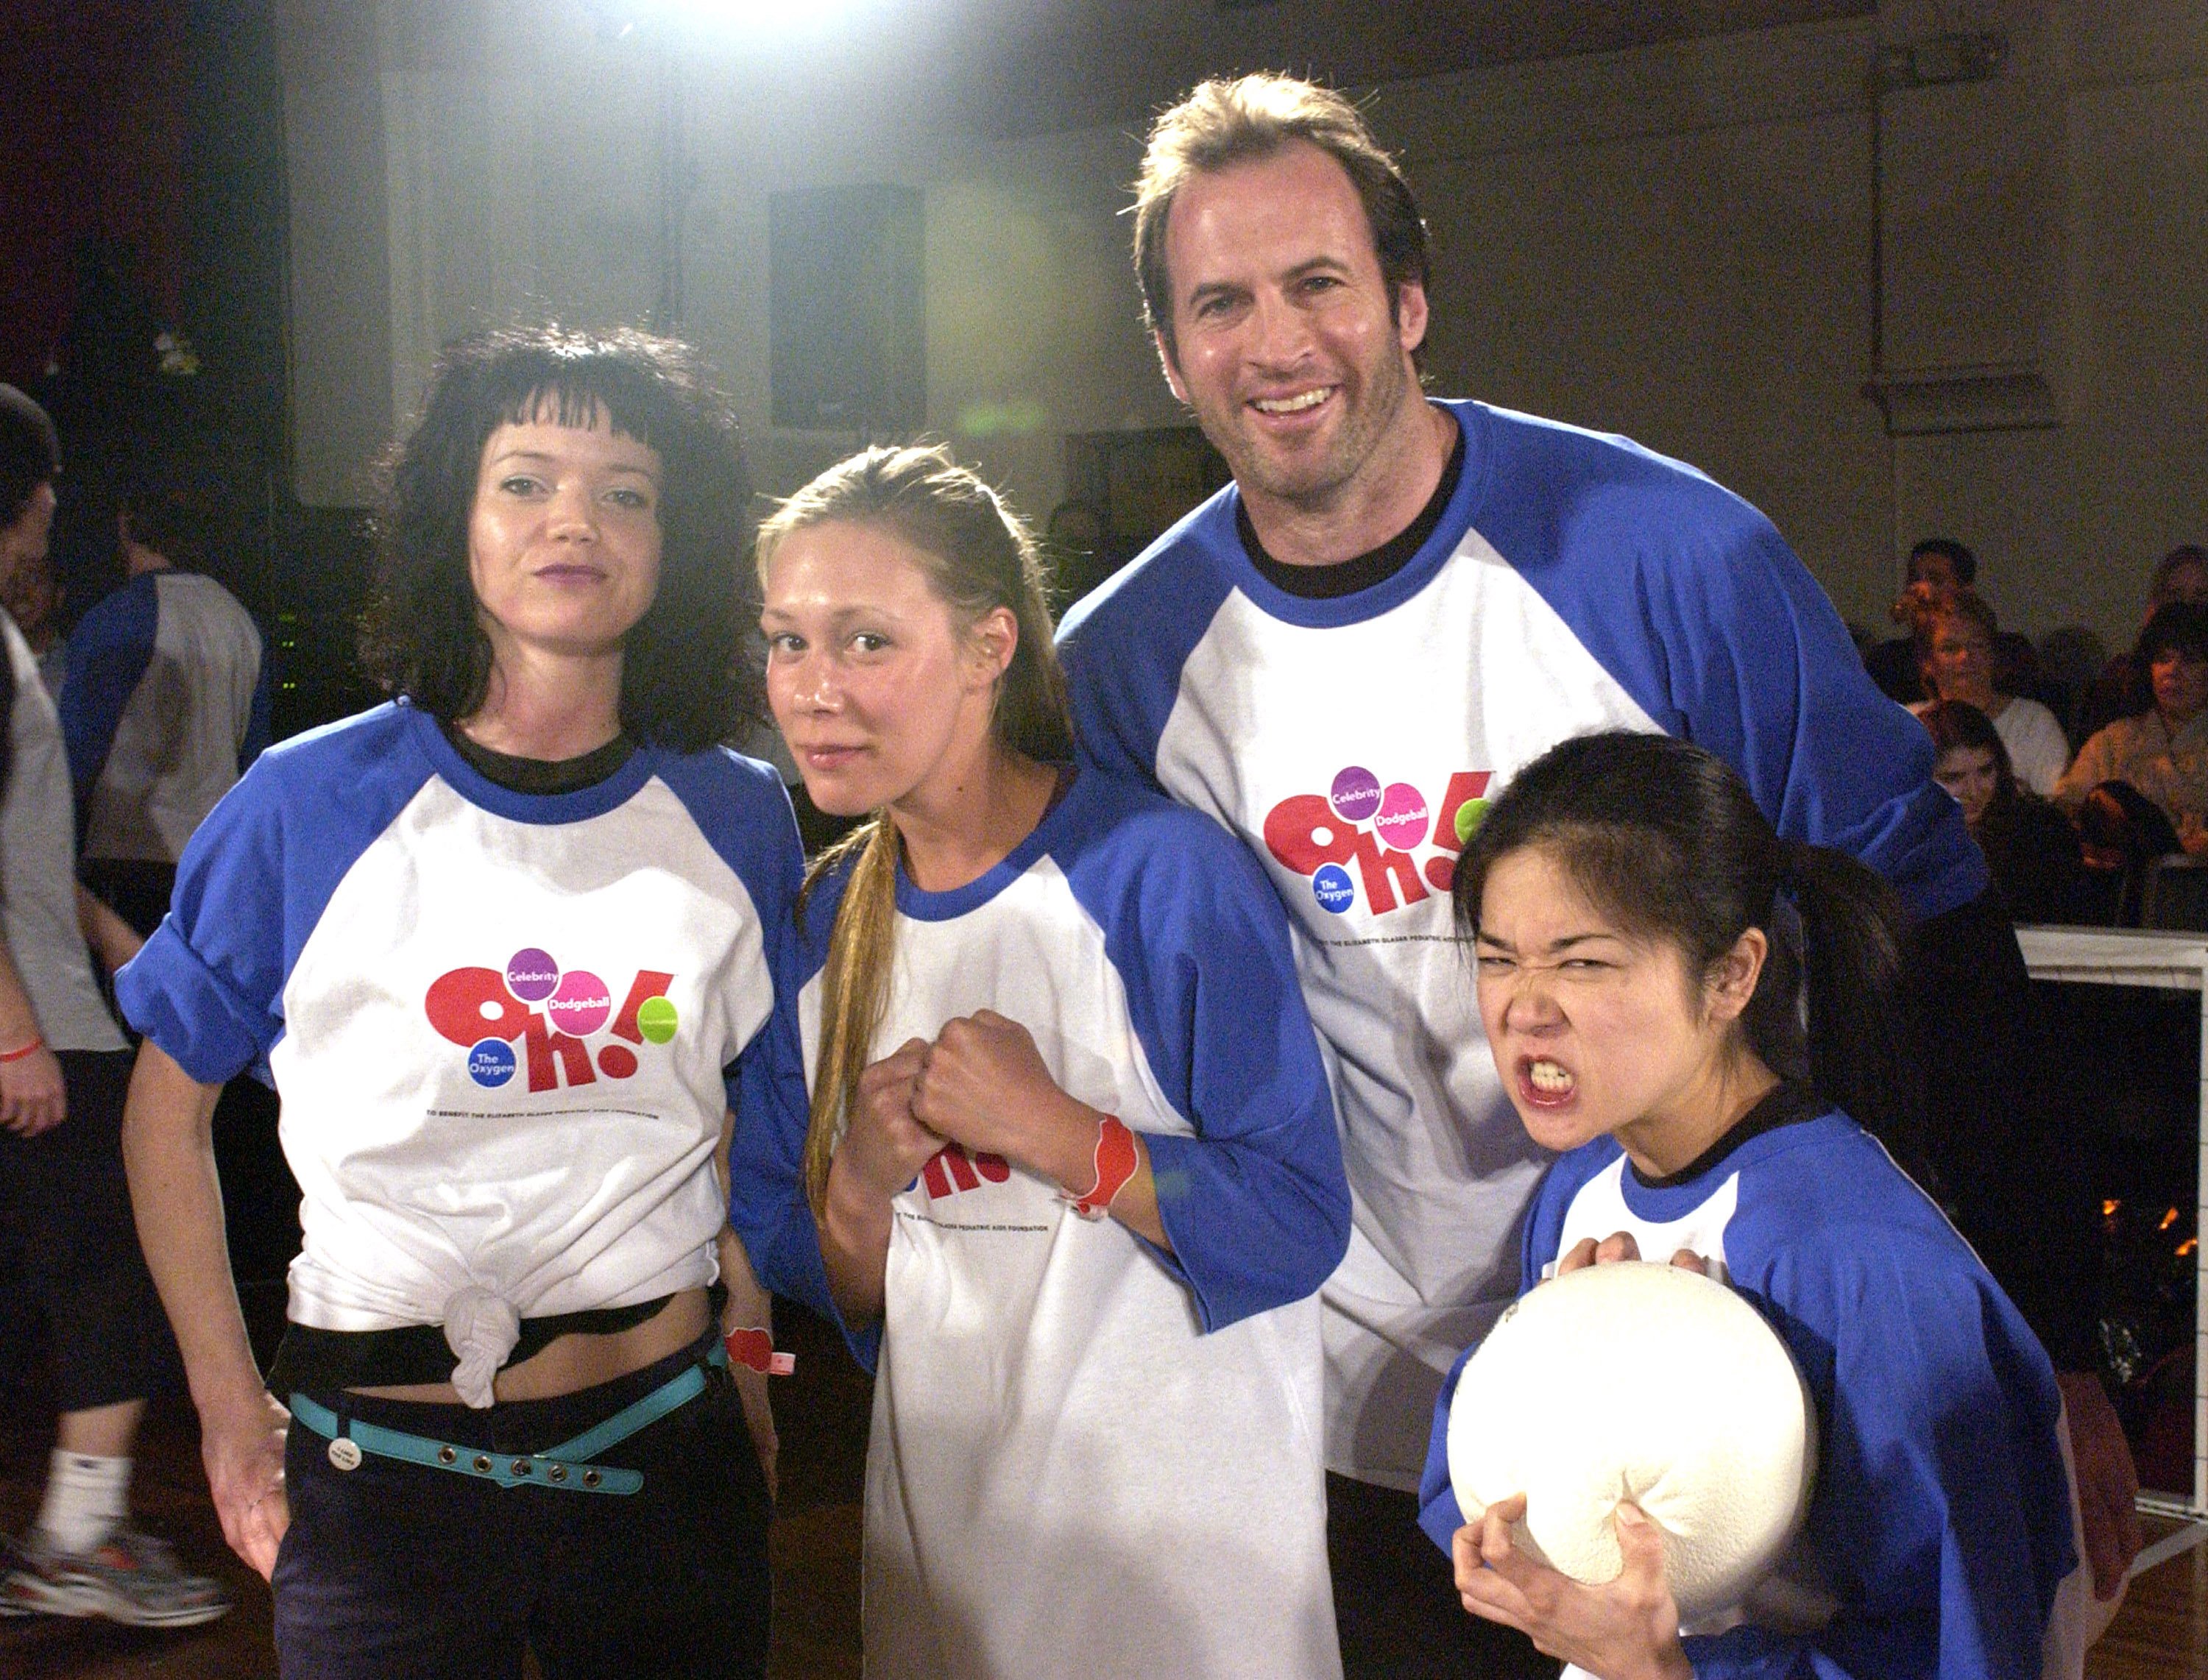 Shelly Cole, Liza Weil, Scott Patterson, and Keiko Agena take part in a celebrity dodgeball tournament